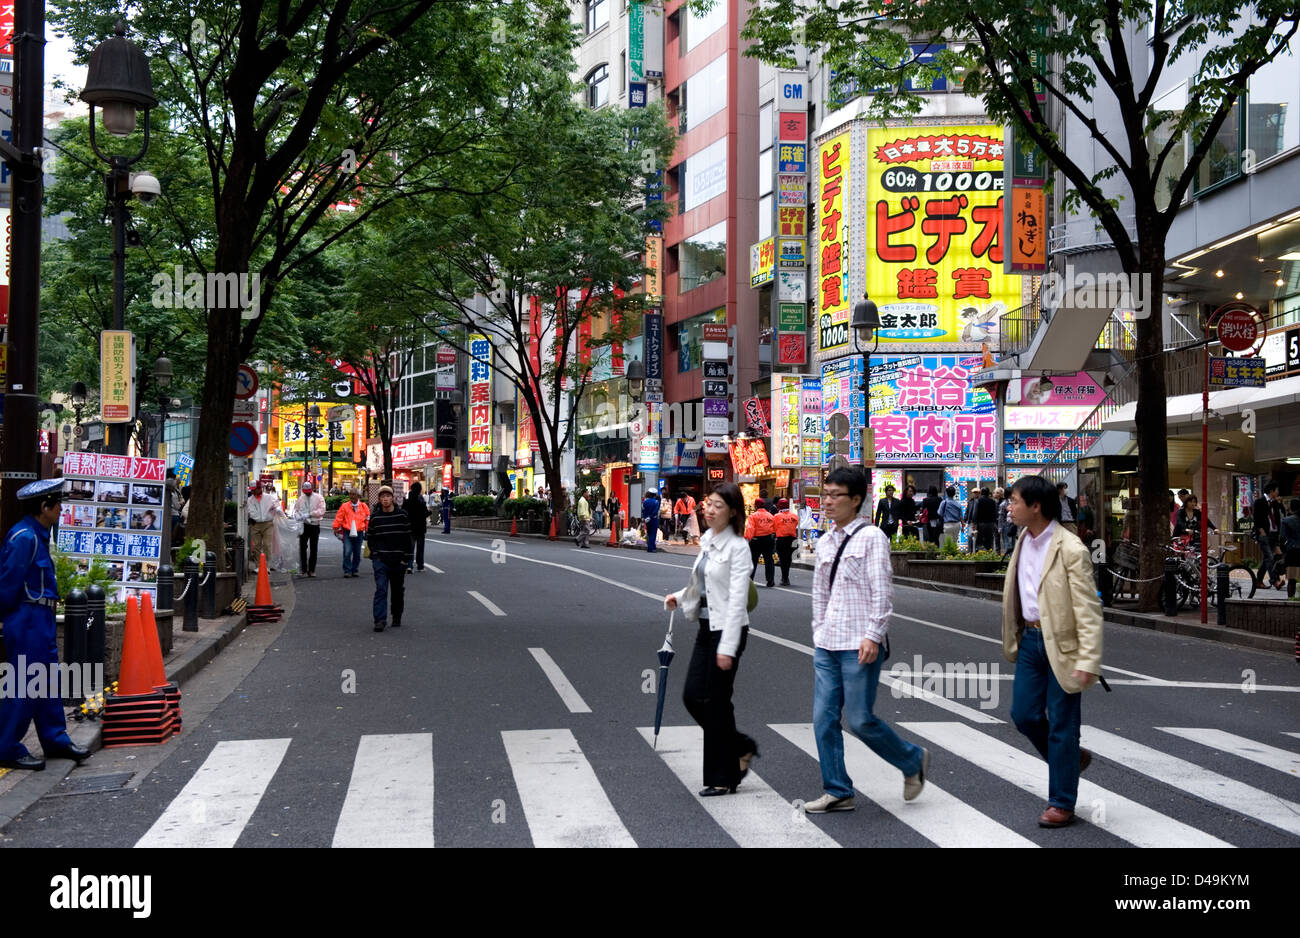 Dogenzaka Street is a popular district in Shibuya, Tokyo for shopping and entertainment. Stock Photo